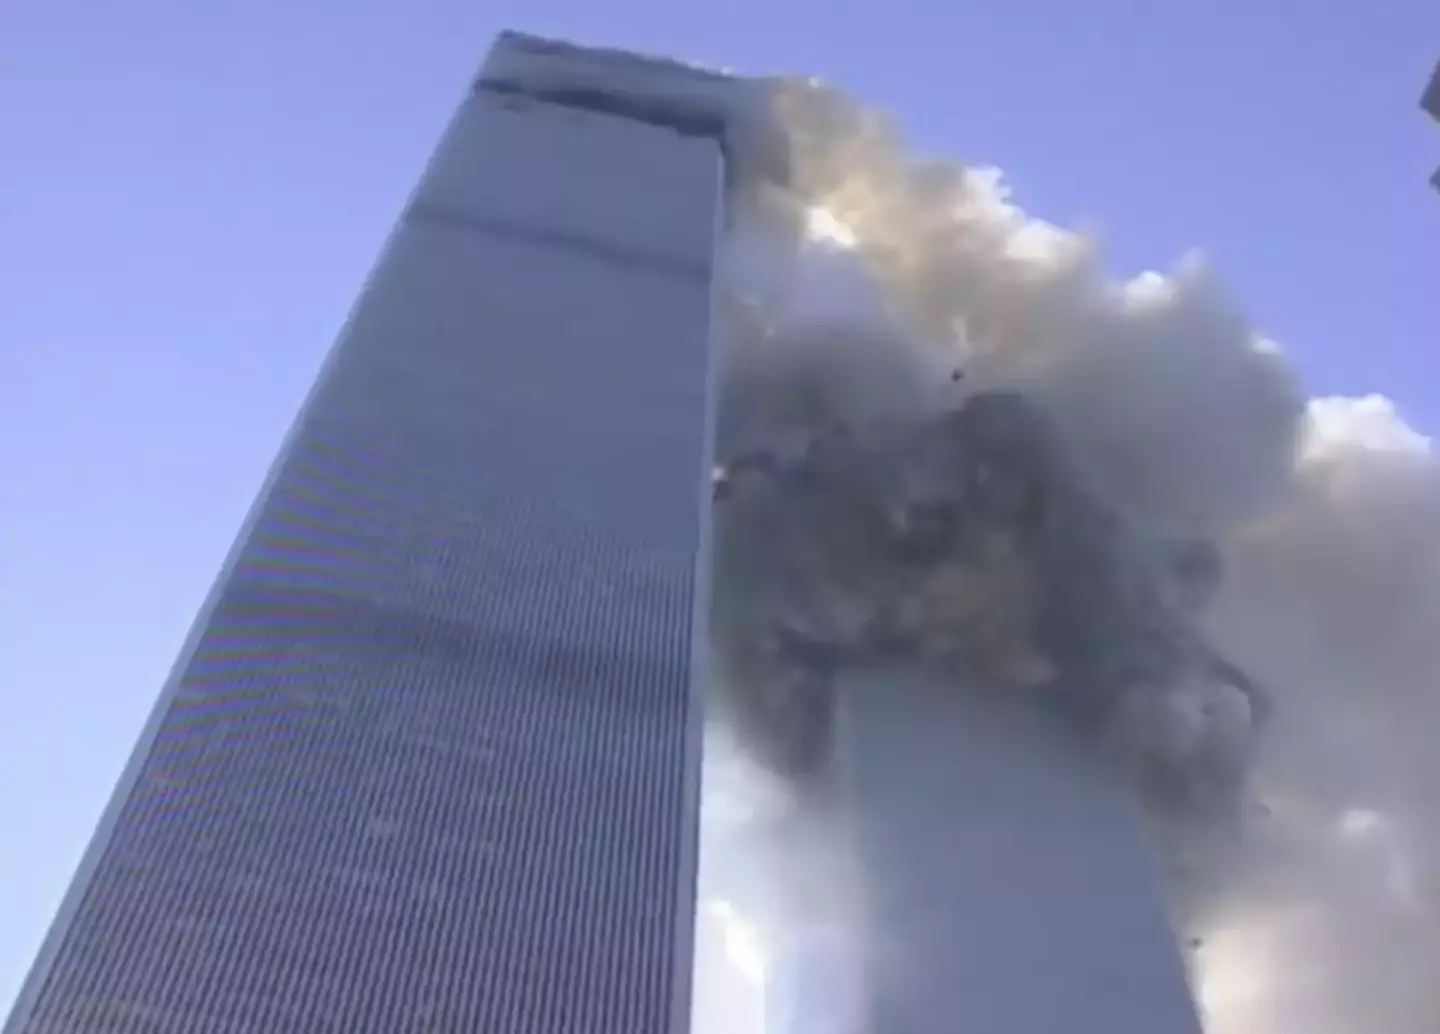 ABC’s NJ Burkett was on the scene reporting from just below the World Trade Center.